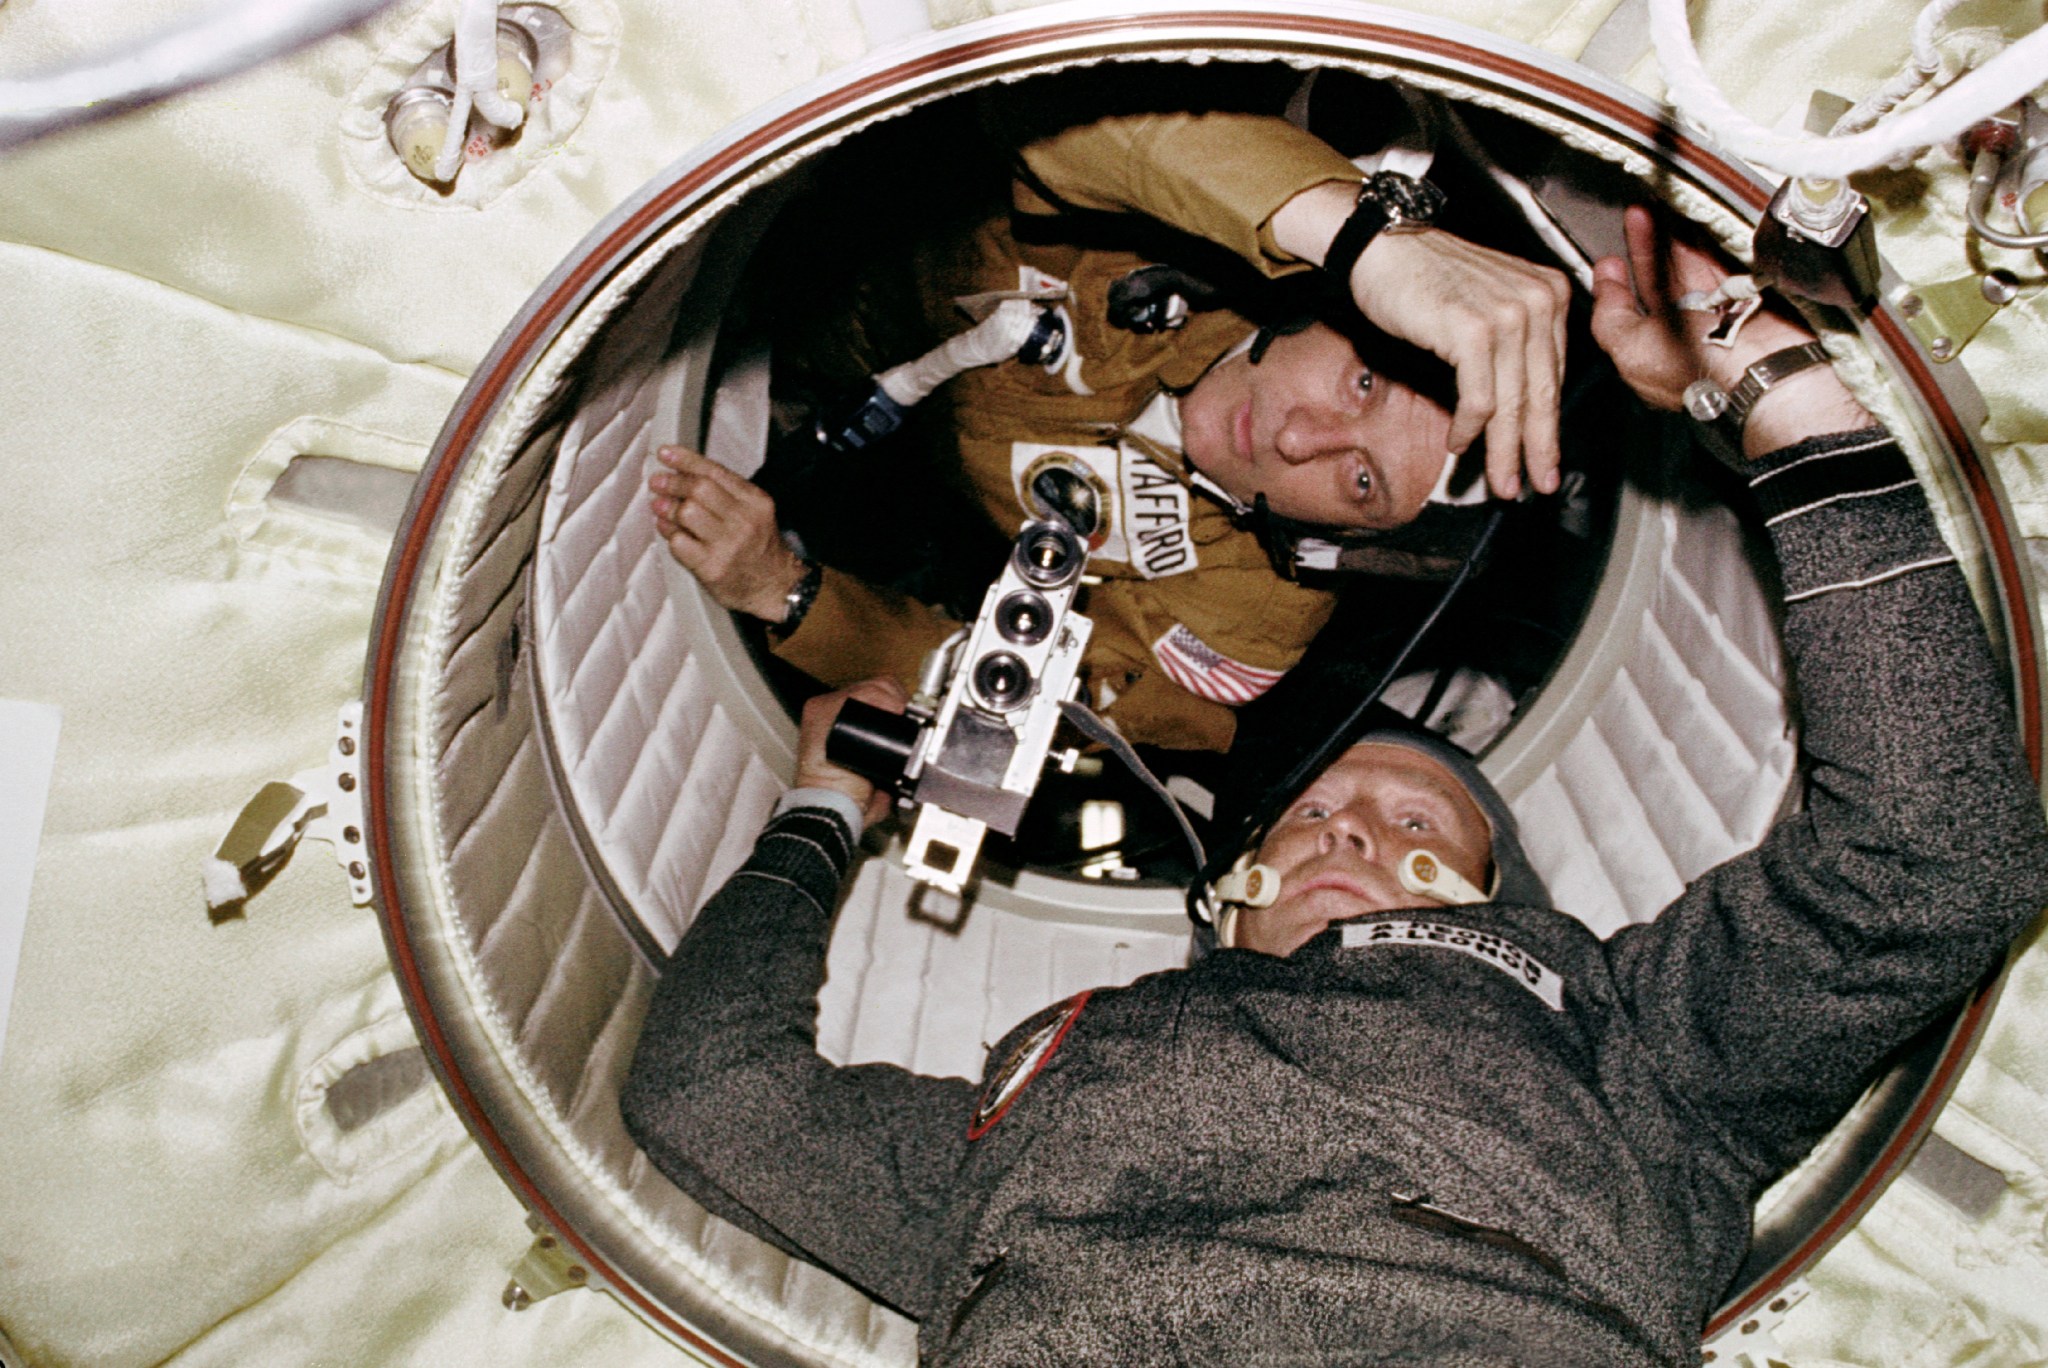 U.S. astronaut and cosmonaut meet in the hatchway leading from Apollo to the Soyuz orbital module.